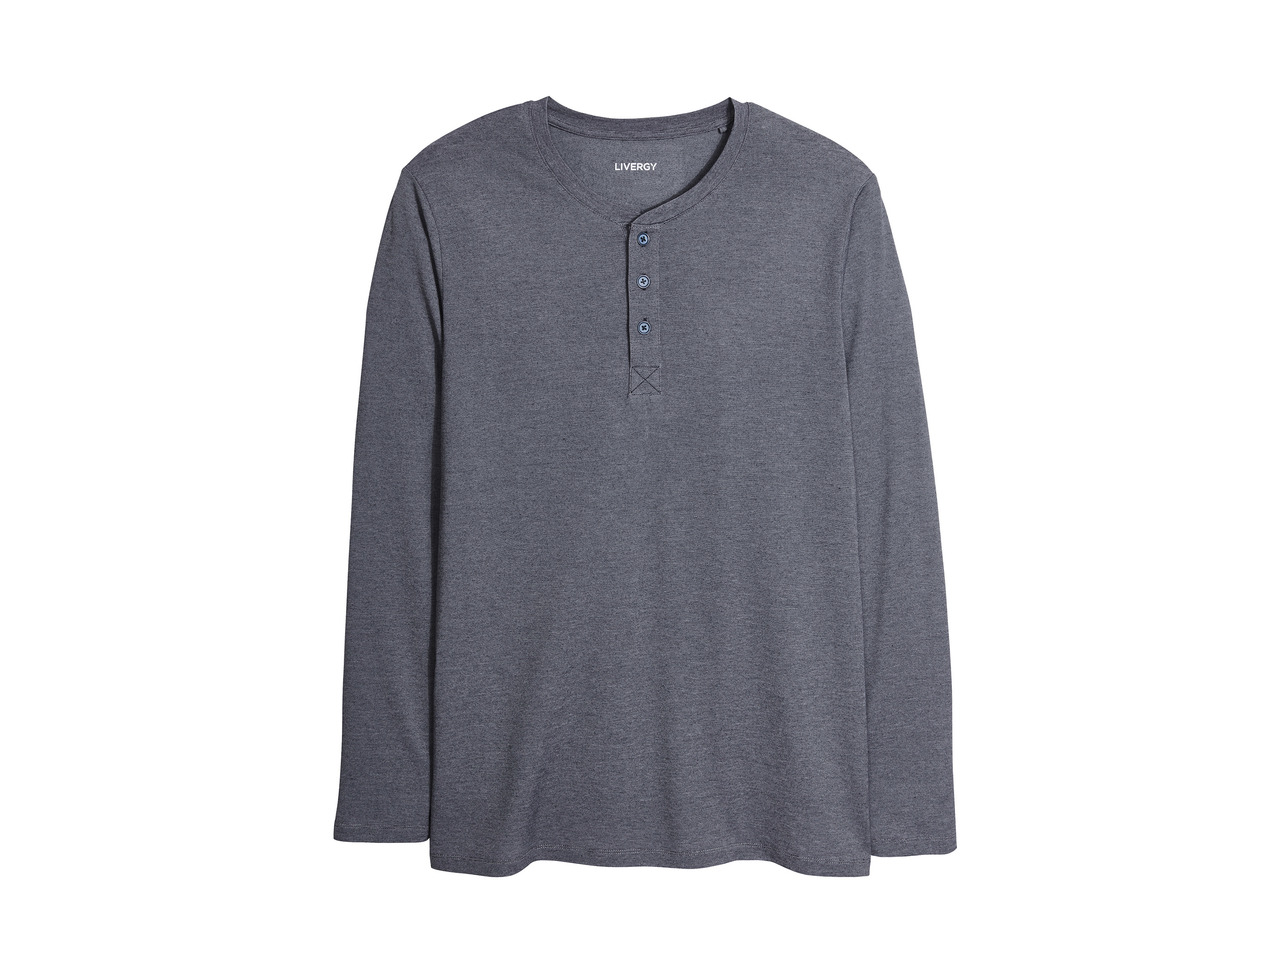 Livergy Men's Long Sleeve Top1 - Lidl — Great Britain - Specials archive